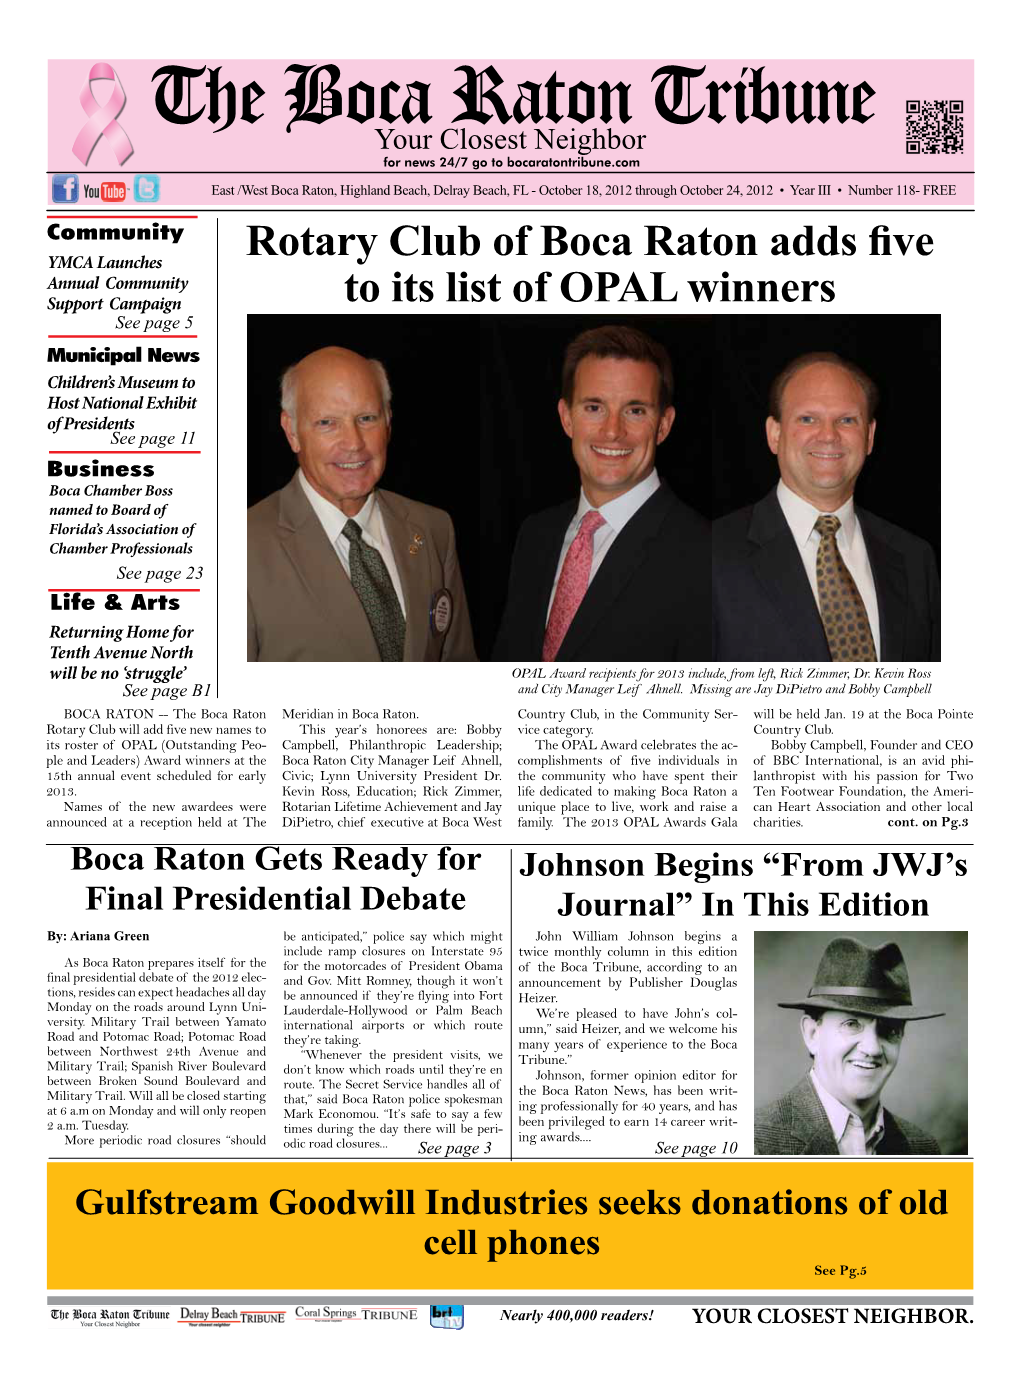 Rotary Club of Boca Raton Adds Five to Its List of OPAL Winners Continued from Pg